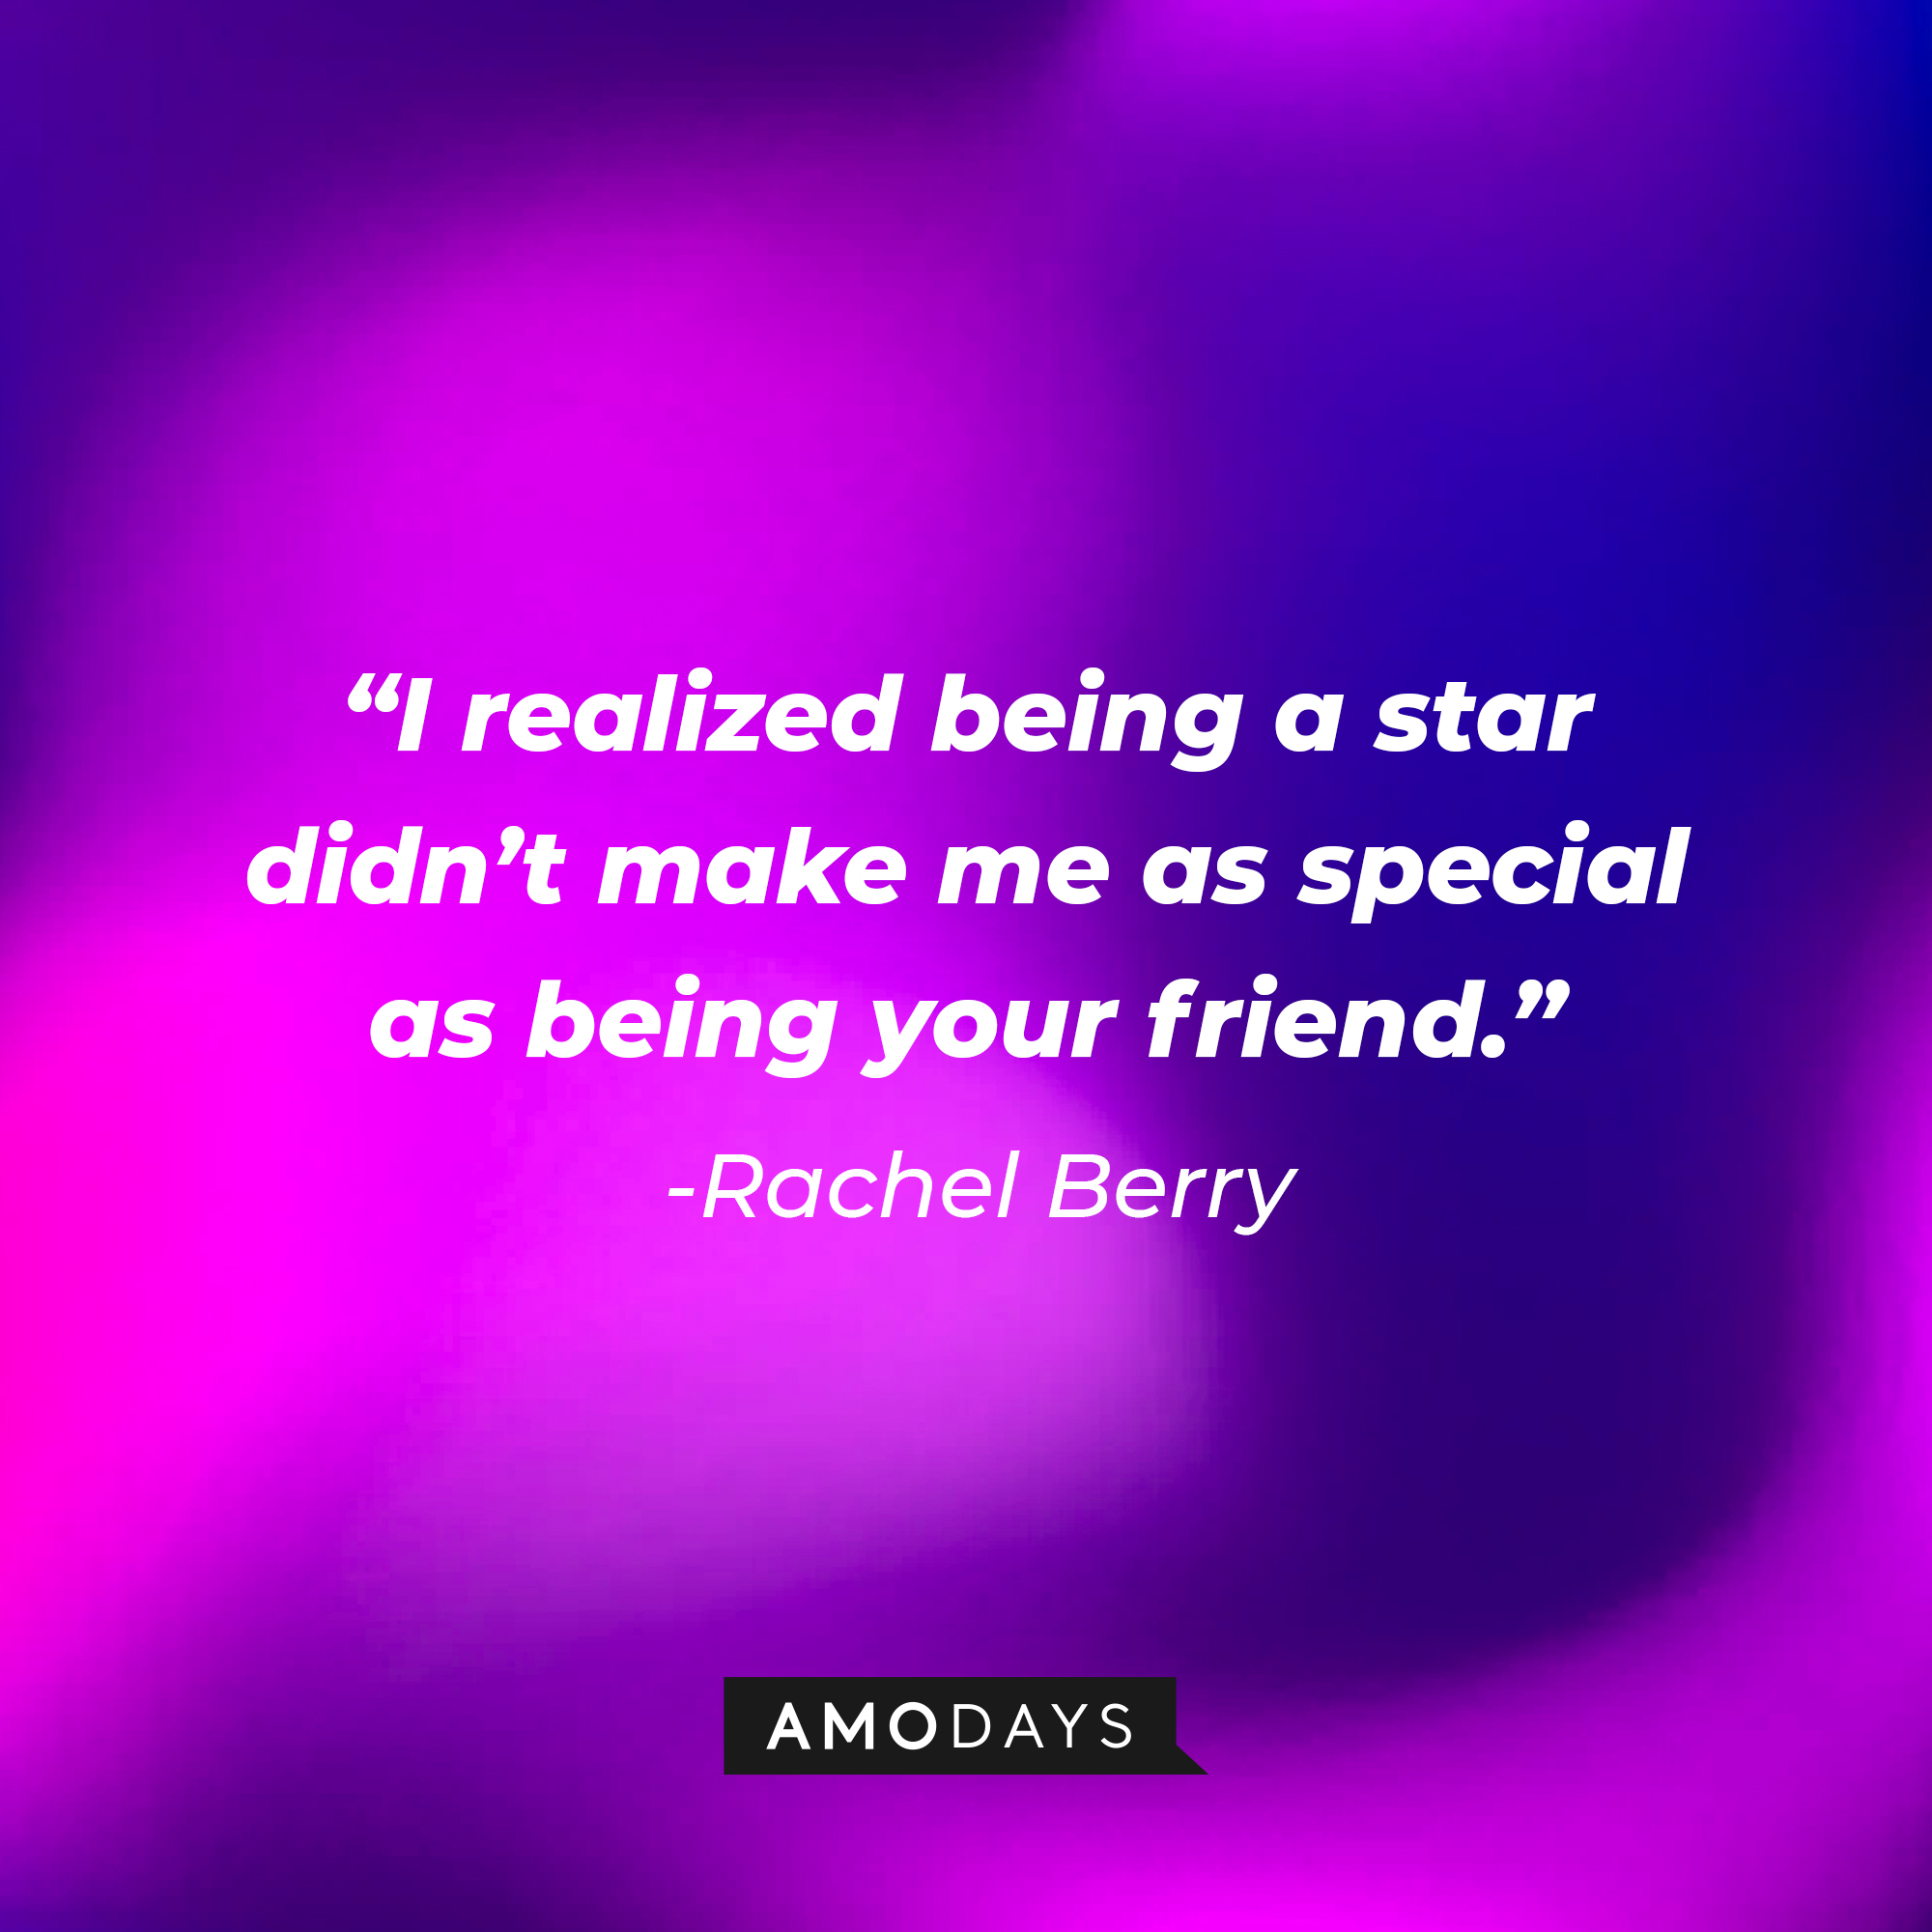 Rachel Berry’s quote from “Glee”: “I realized being a star didn’t make me as special as being your friend.” | Image: AmoDays